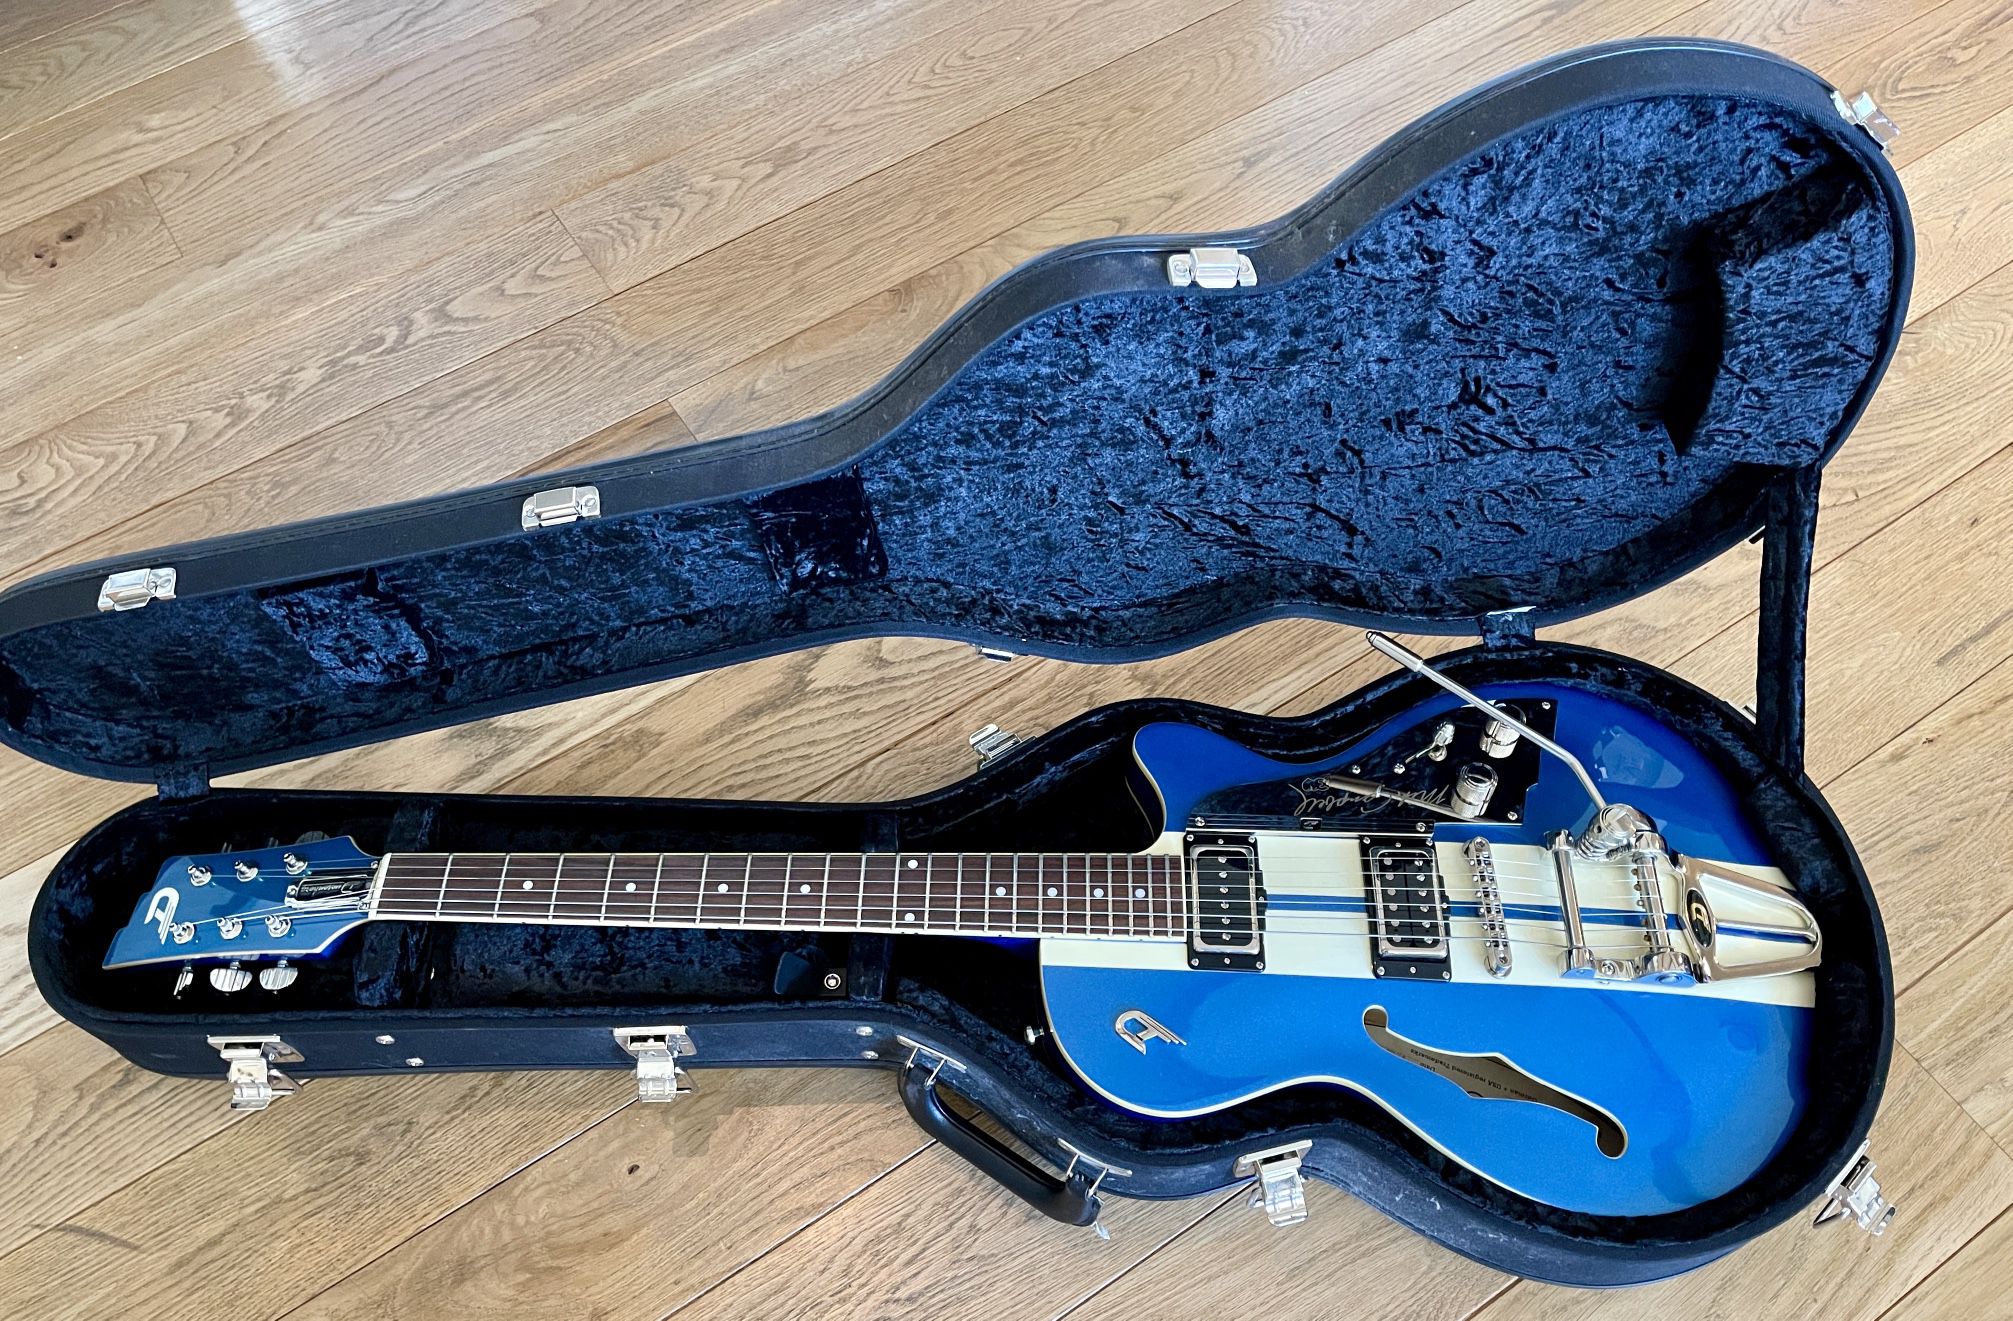 Mint Condition Duesenberg Starplayer TV Mike Campbell Edition Electric Guitar - Lake Placid Blue